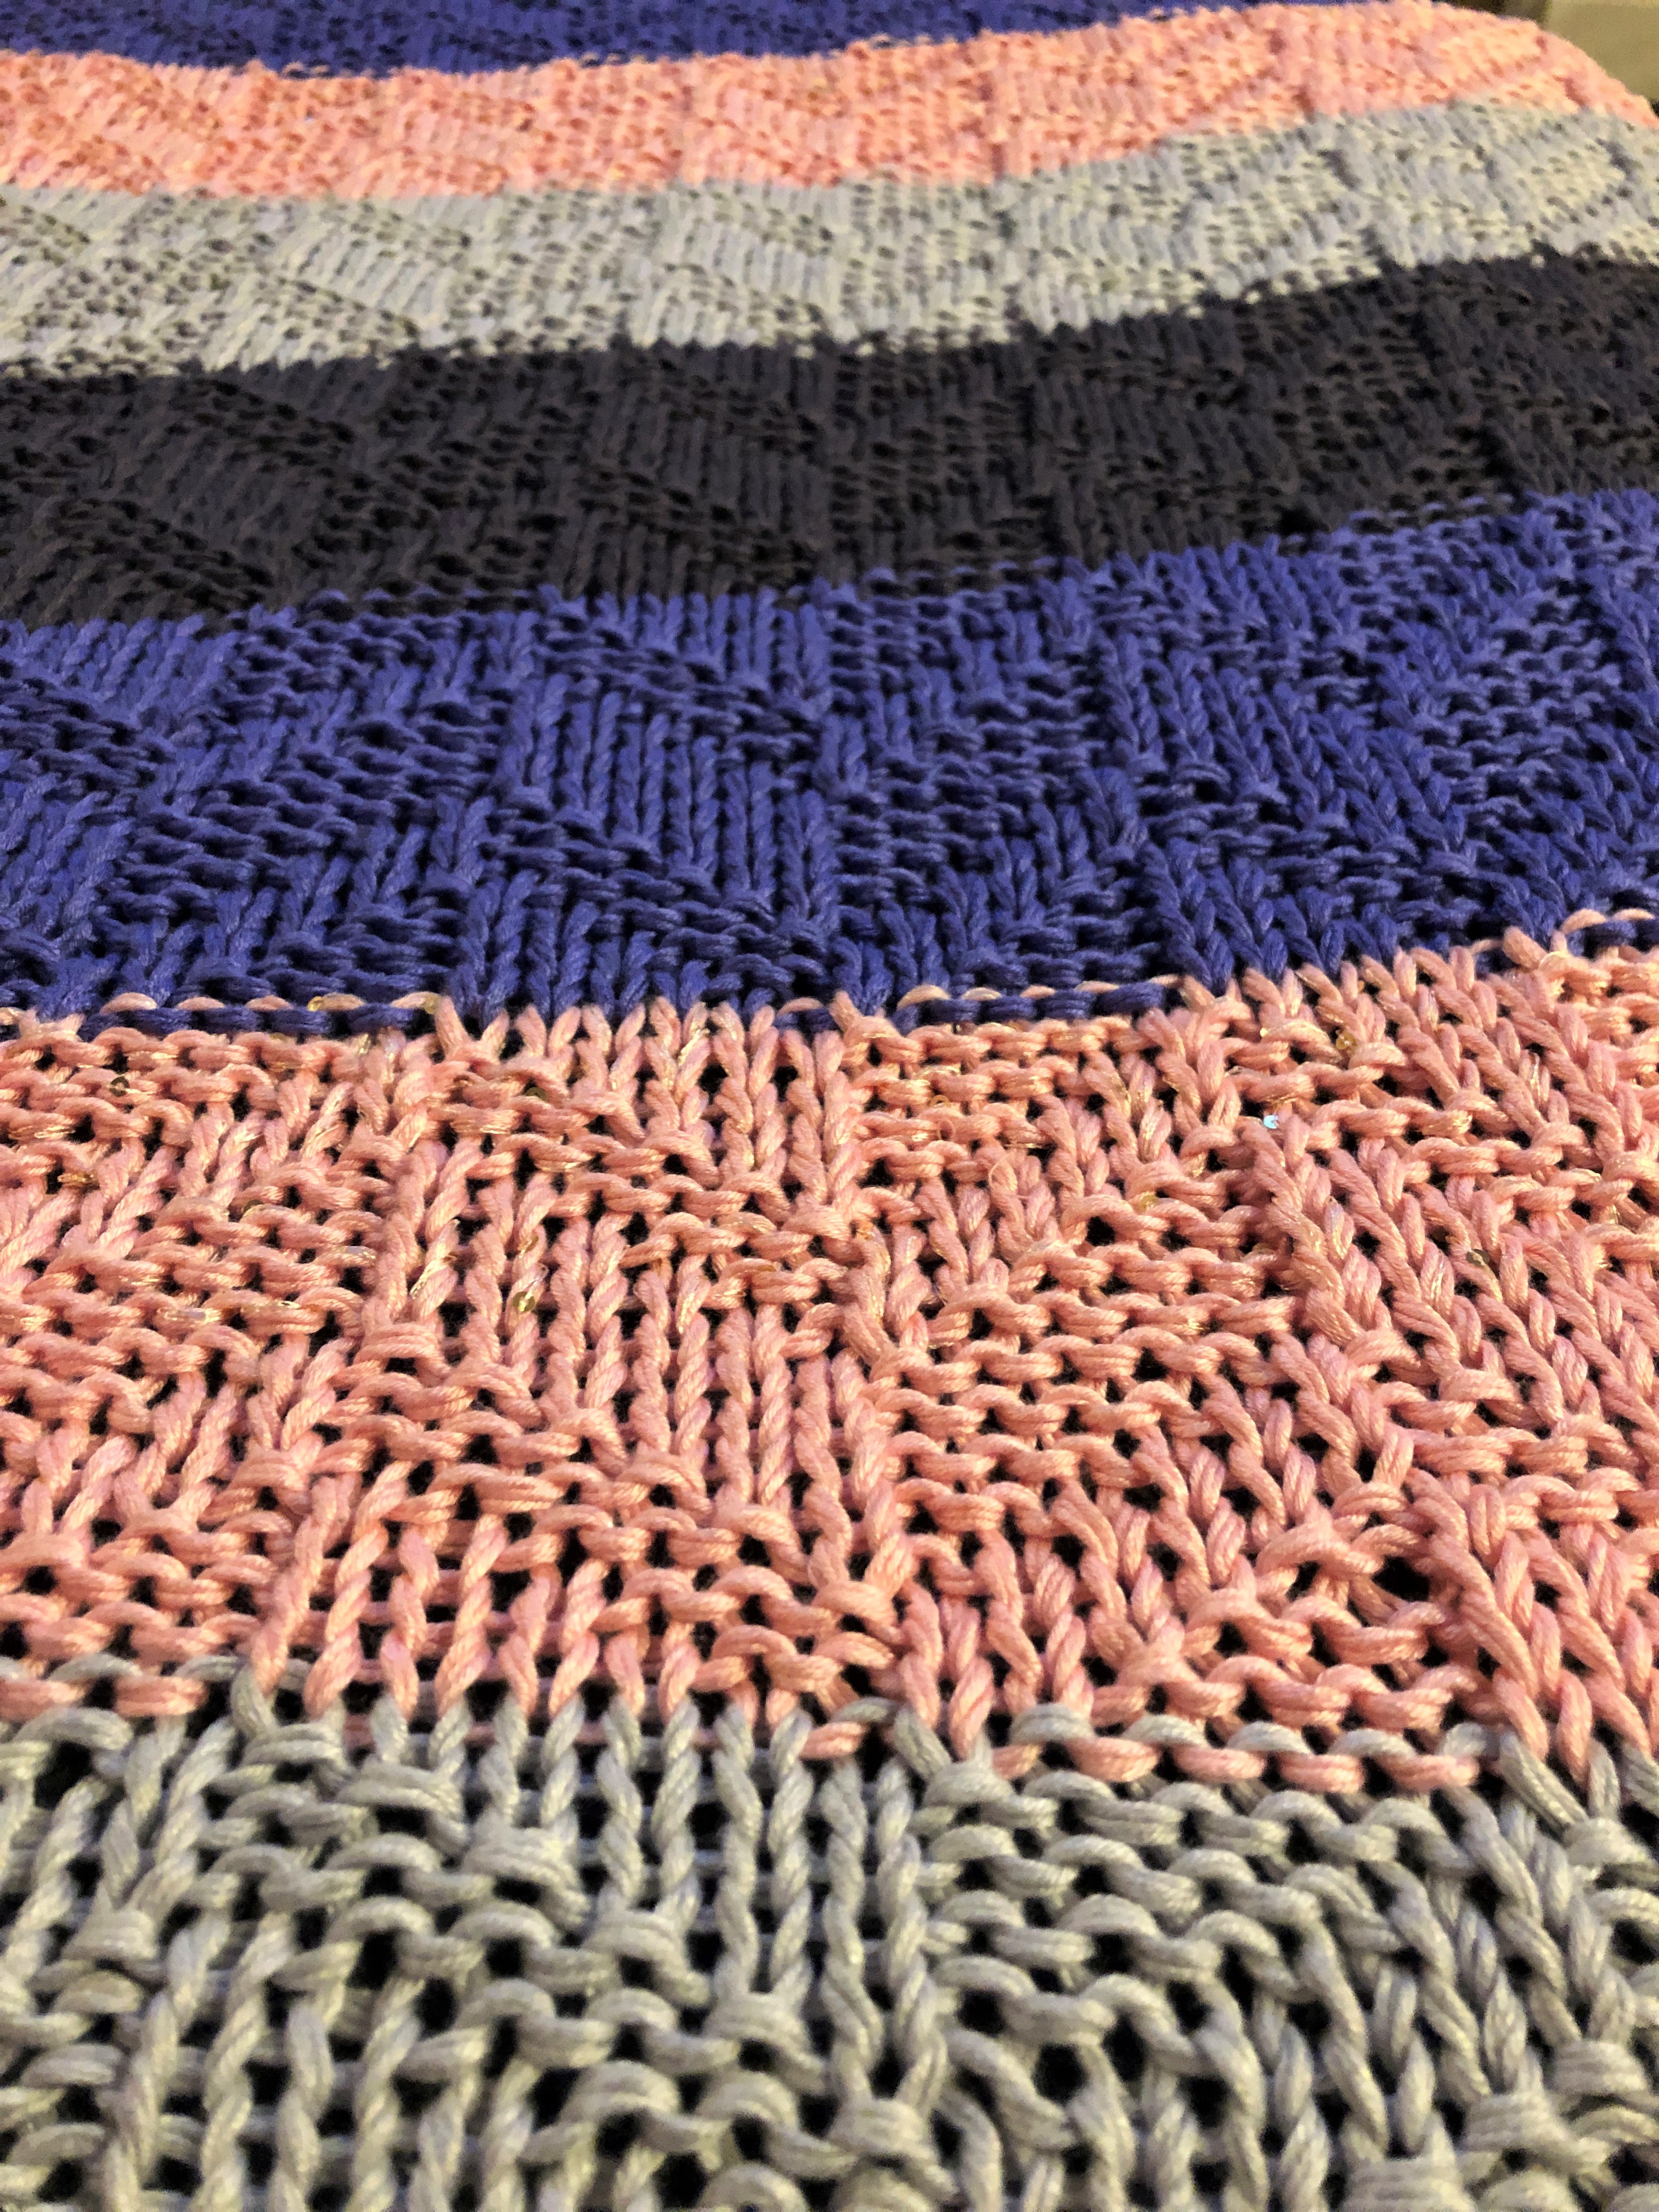 a close-up of a textured knitting stitch on a baby blanket